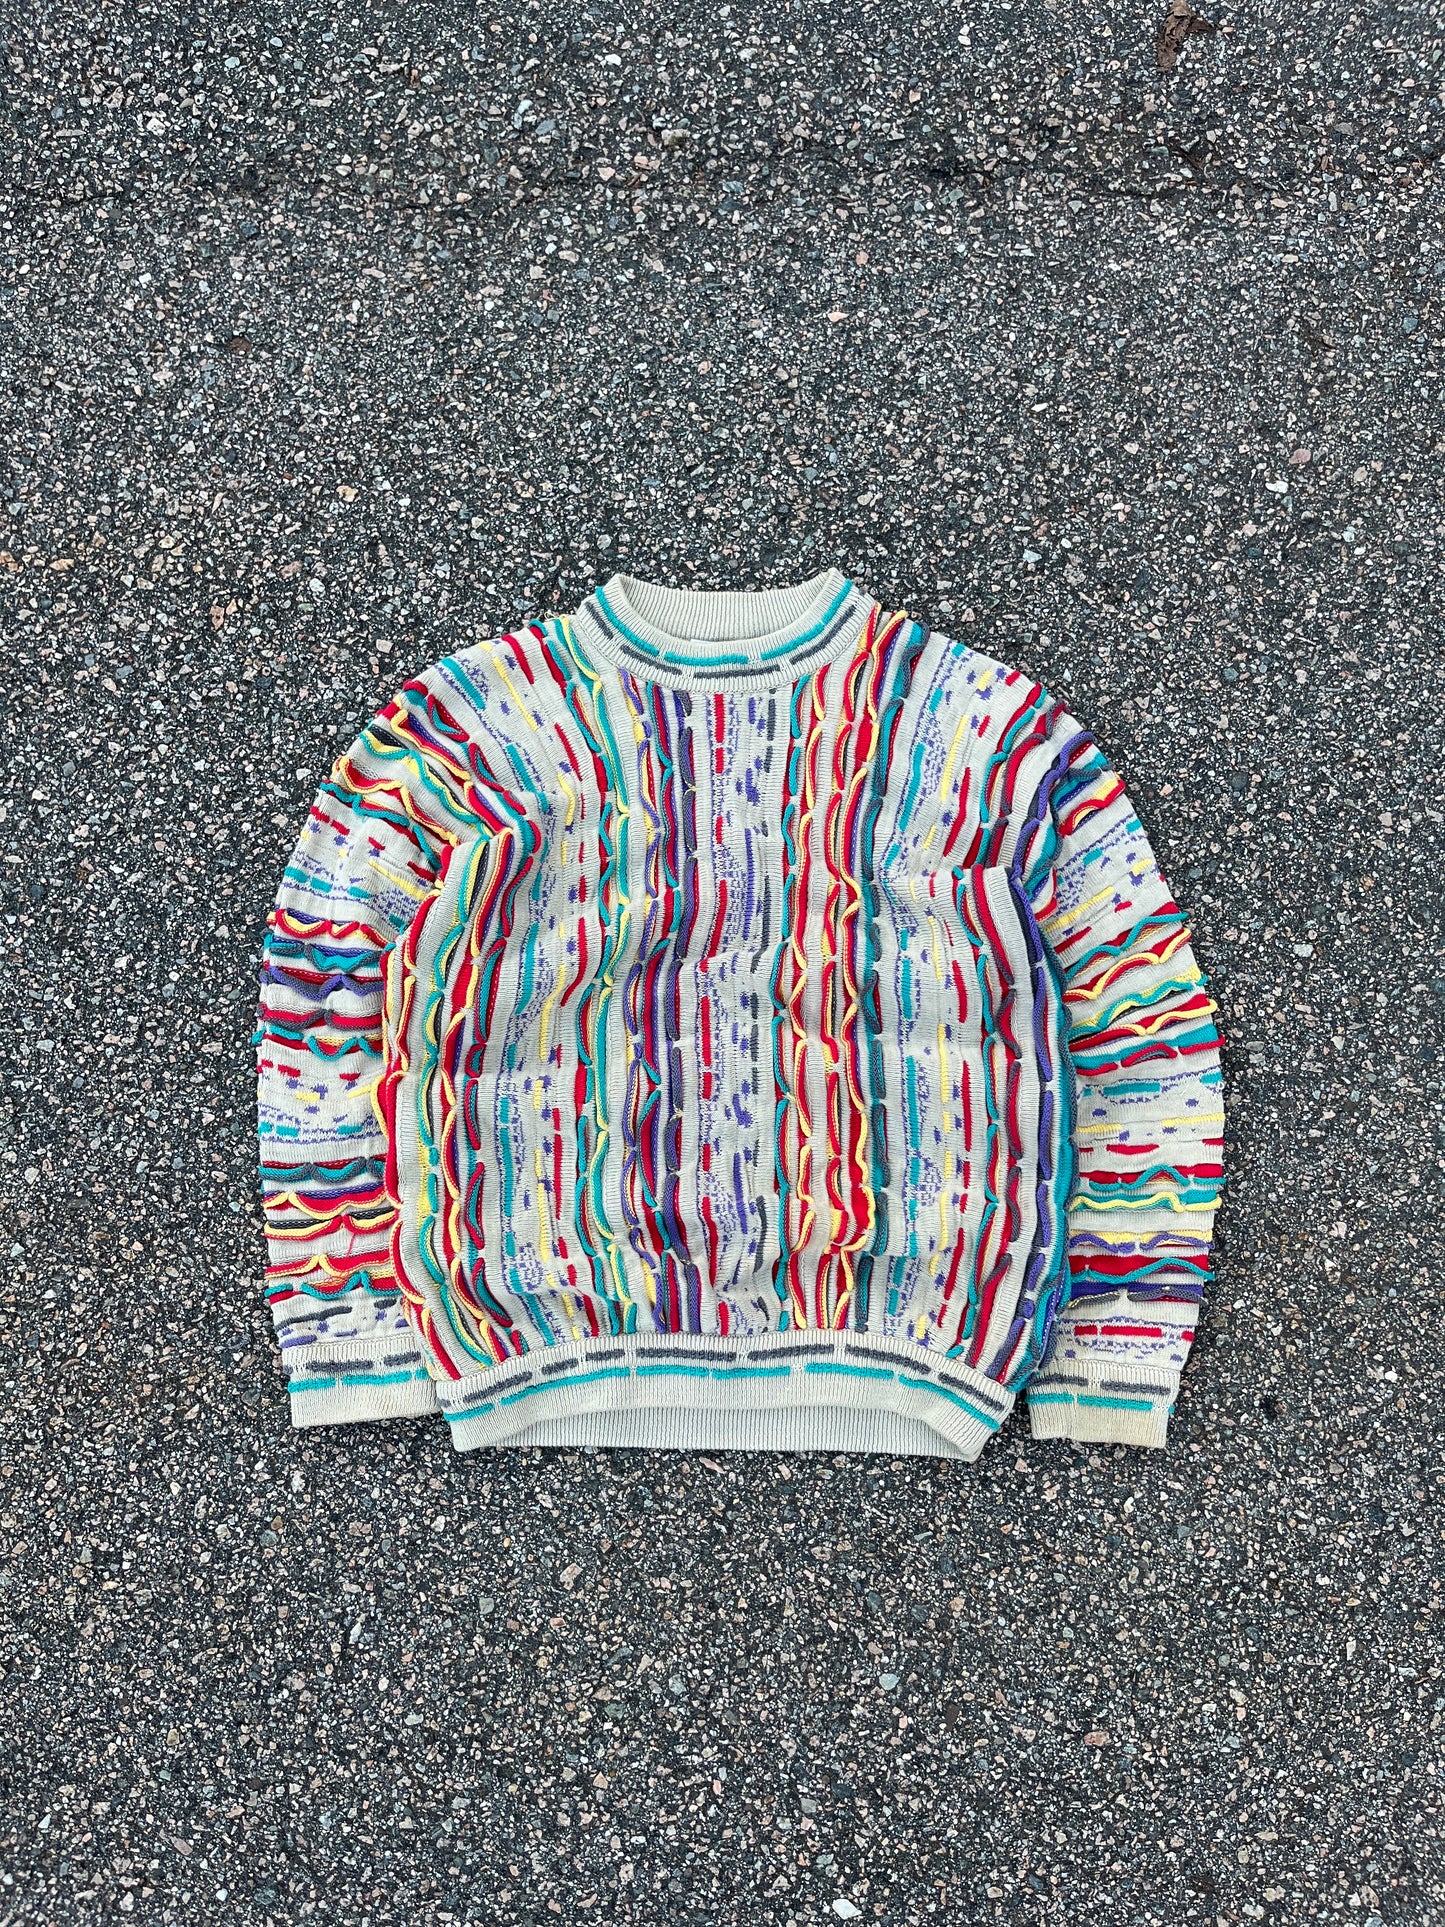 Coogi Made in Australia 3D Knit Cotton Sweater - Small